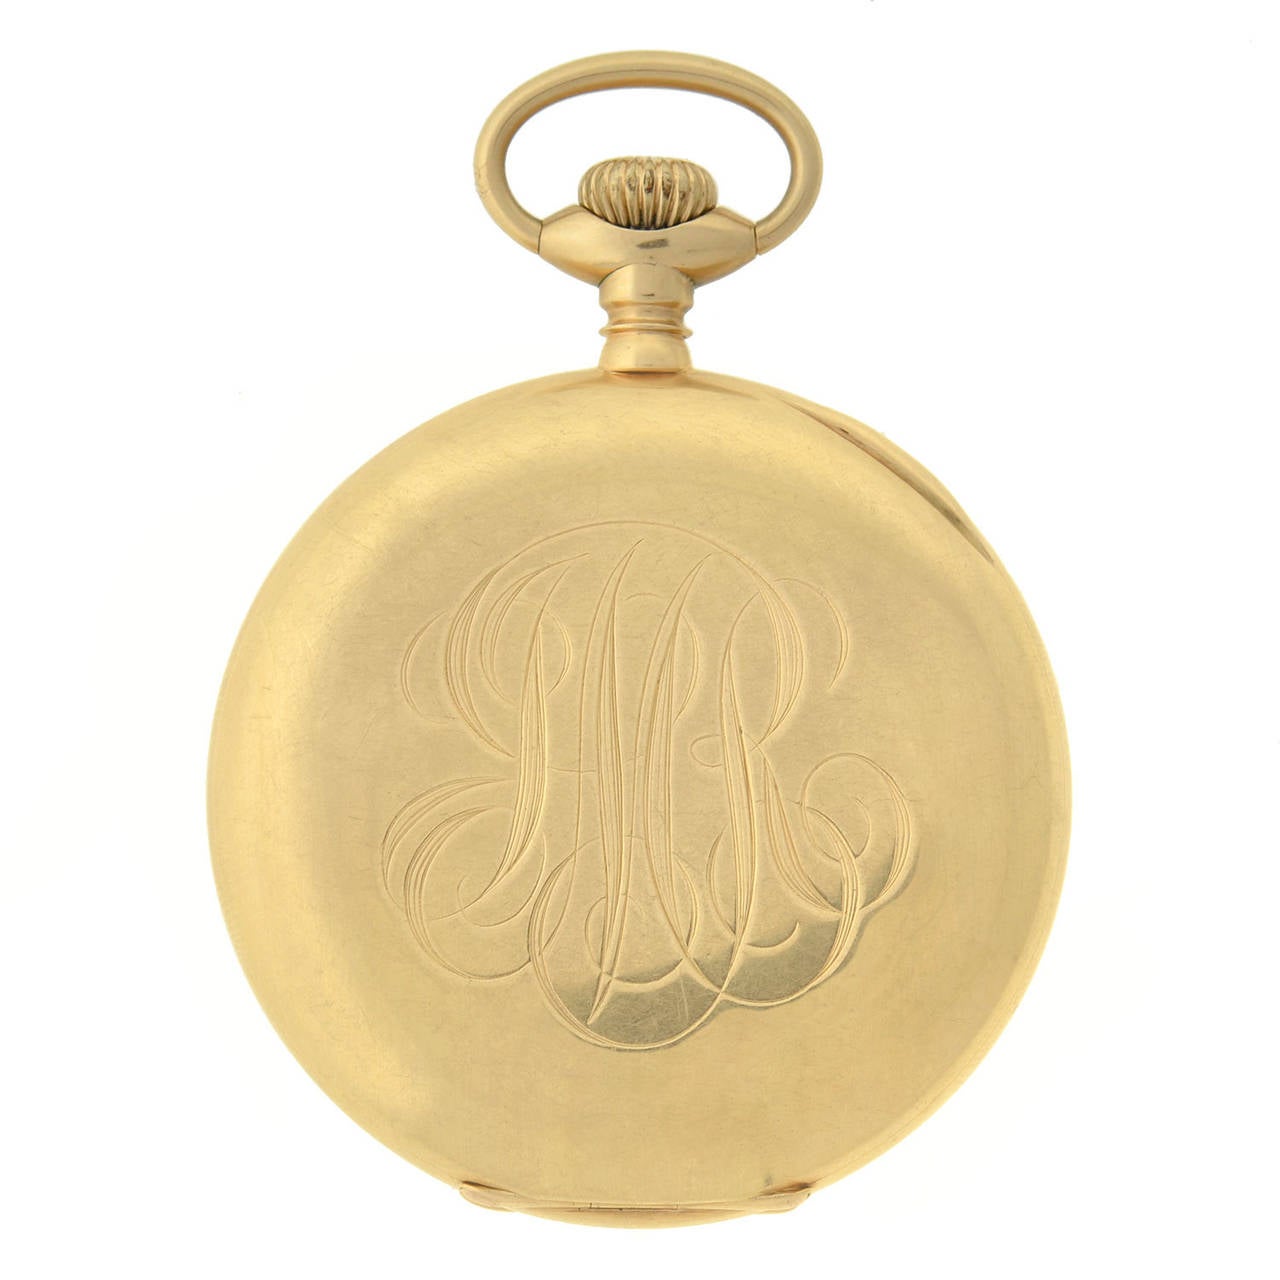 This wonderful pocket watch from circa 1904. Signed by Bailey, Banks & Biddle and Waltham. 14k yellow gold, white dial with gold filigree hands. The engraved inscription reads 